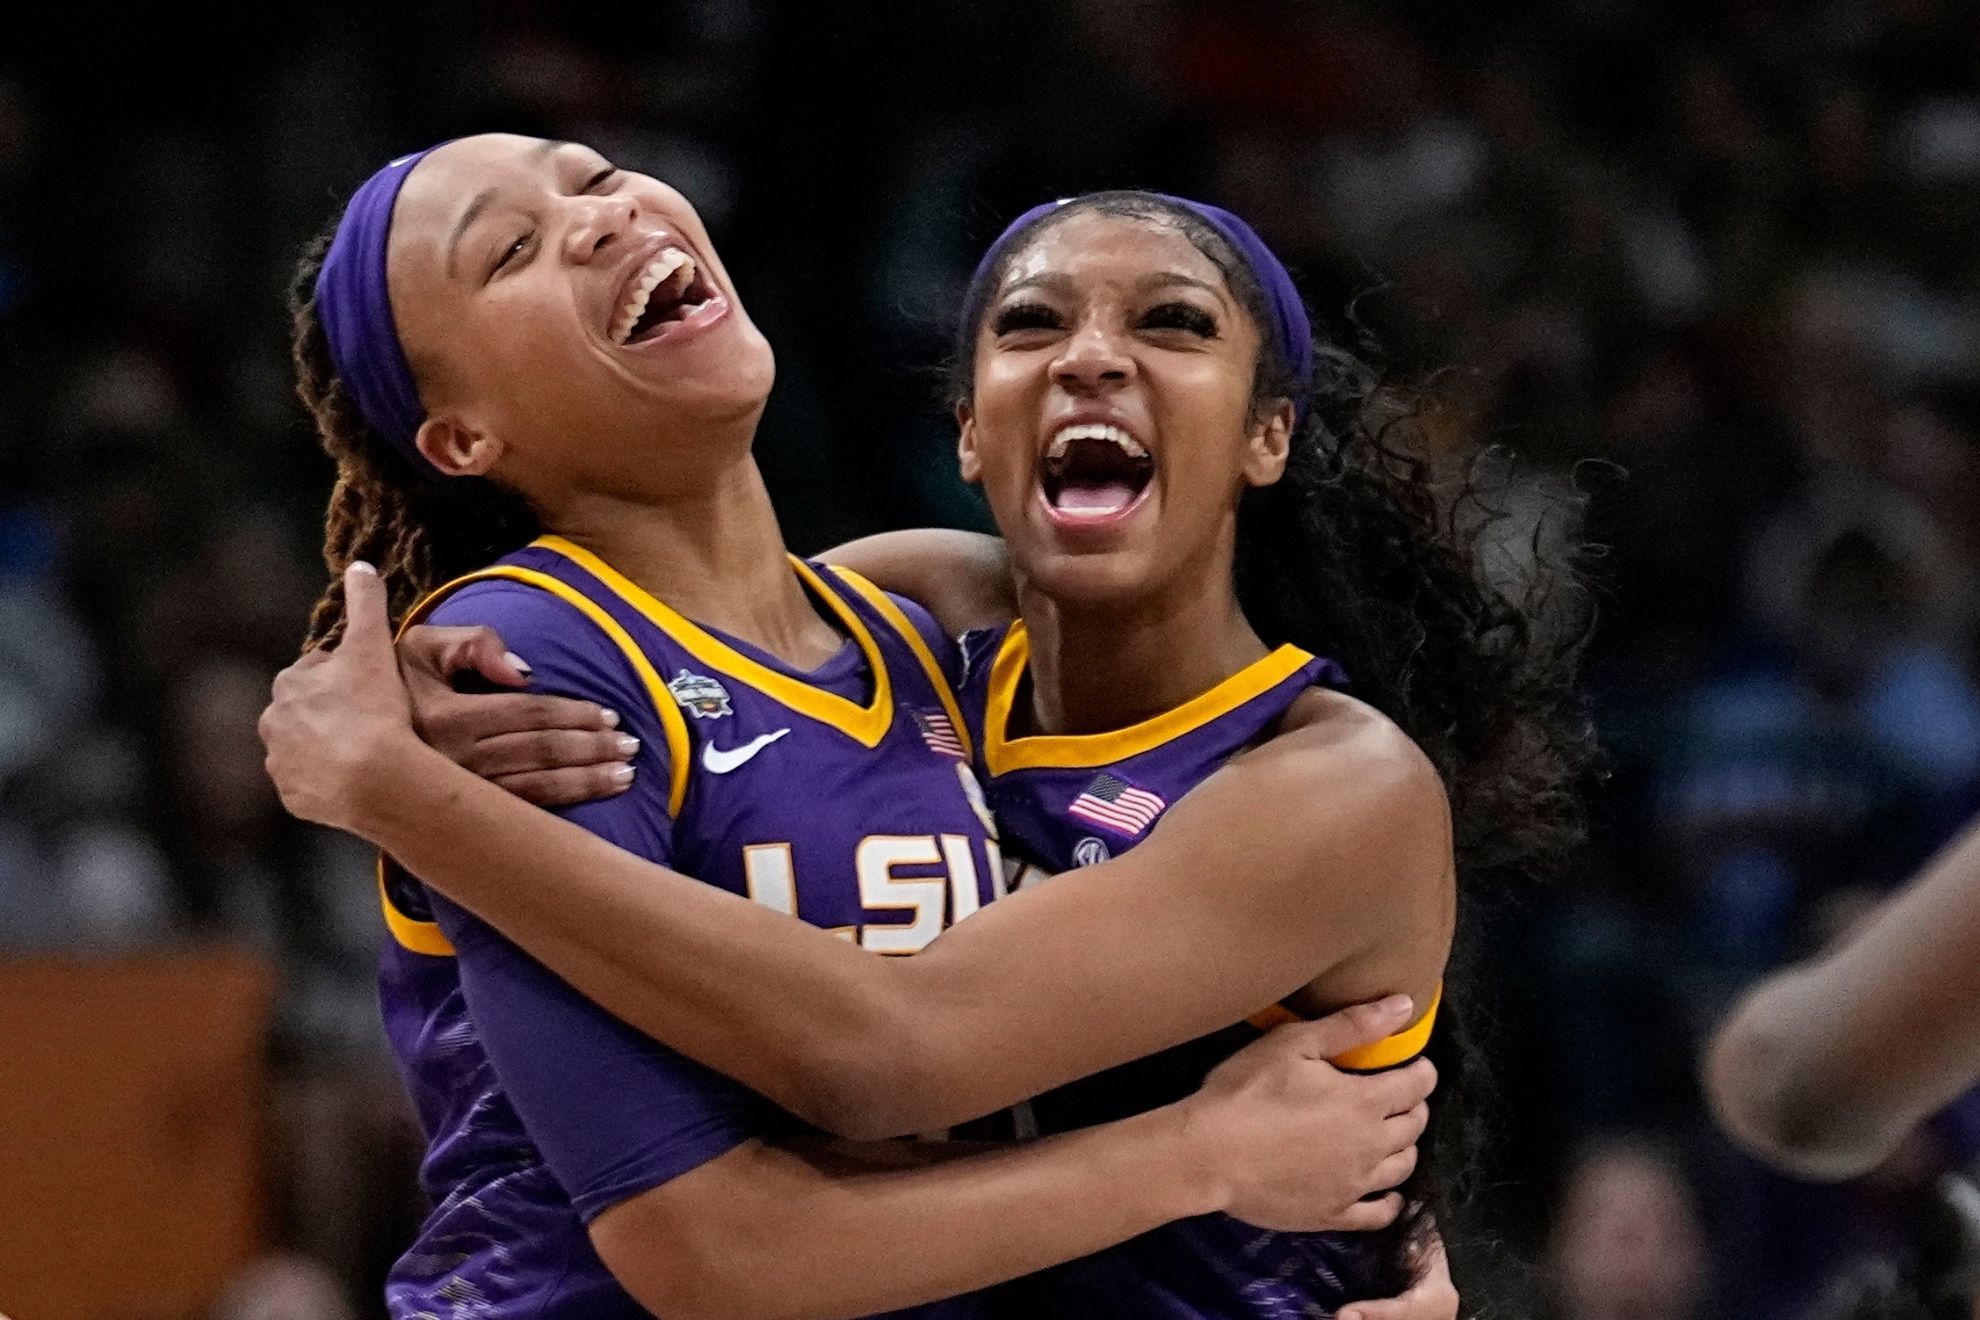 LSU star Angel Reese laughs at Jill Biden's request to host Iowa at White House